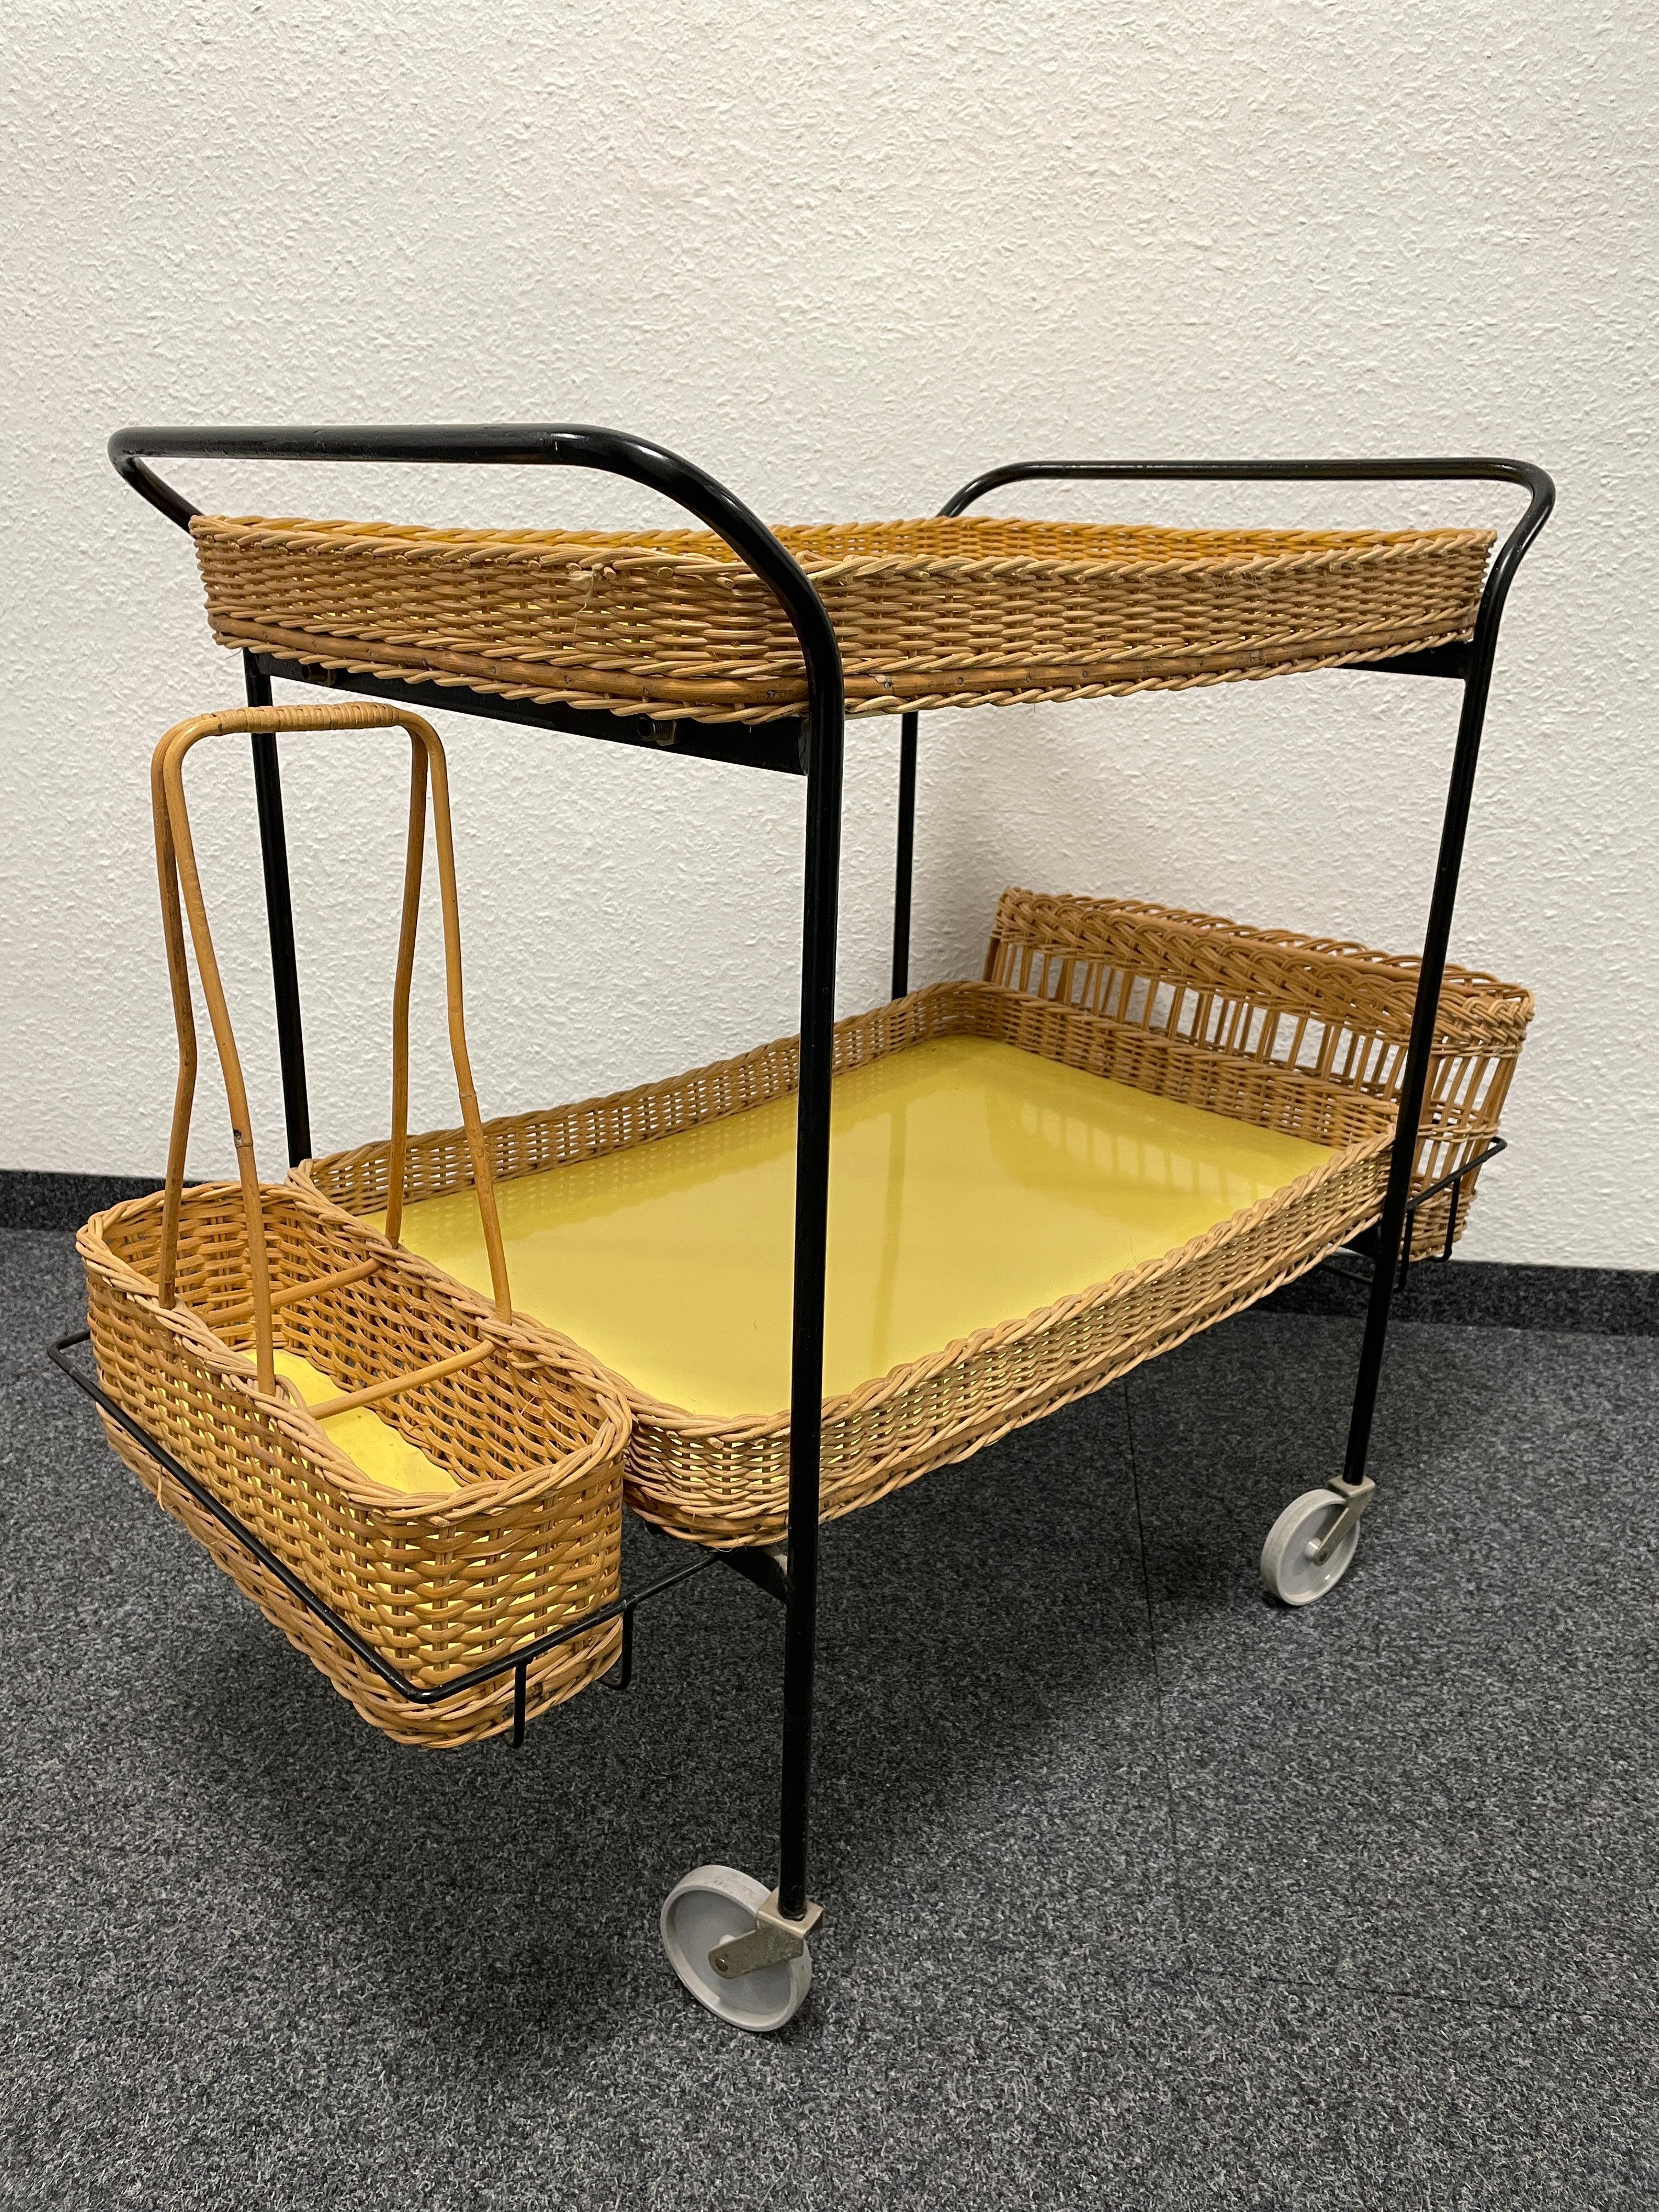 Mid-Century Modern Wicker and Iron Bar Cart or Tea Trolley Table, German, 1950s For Sale